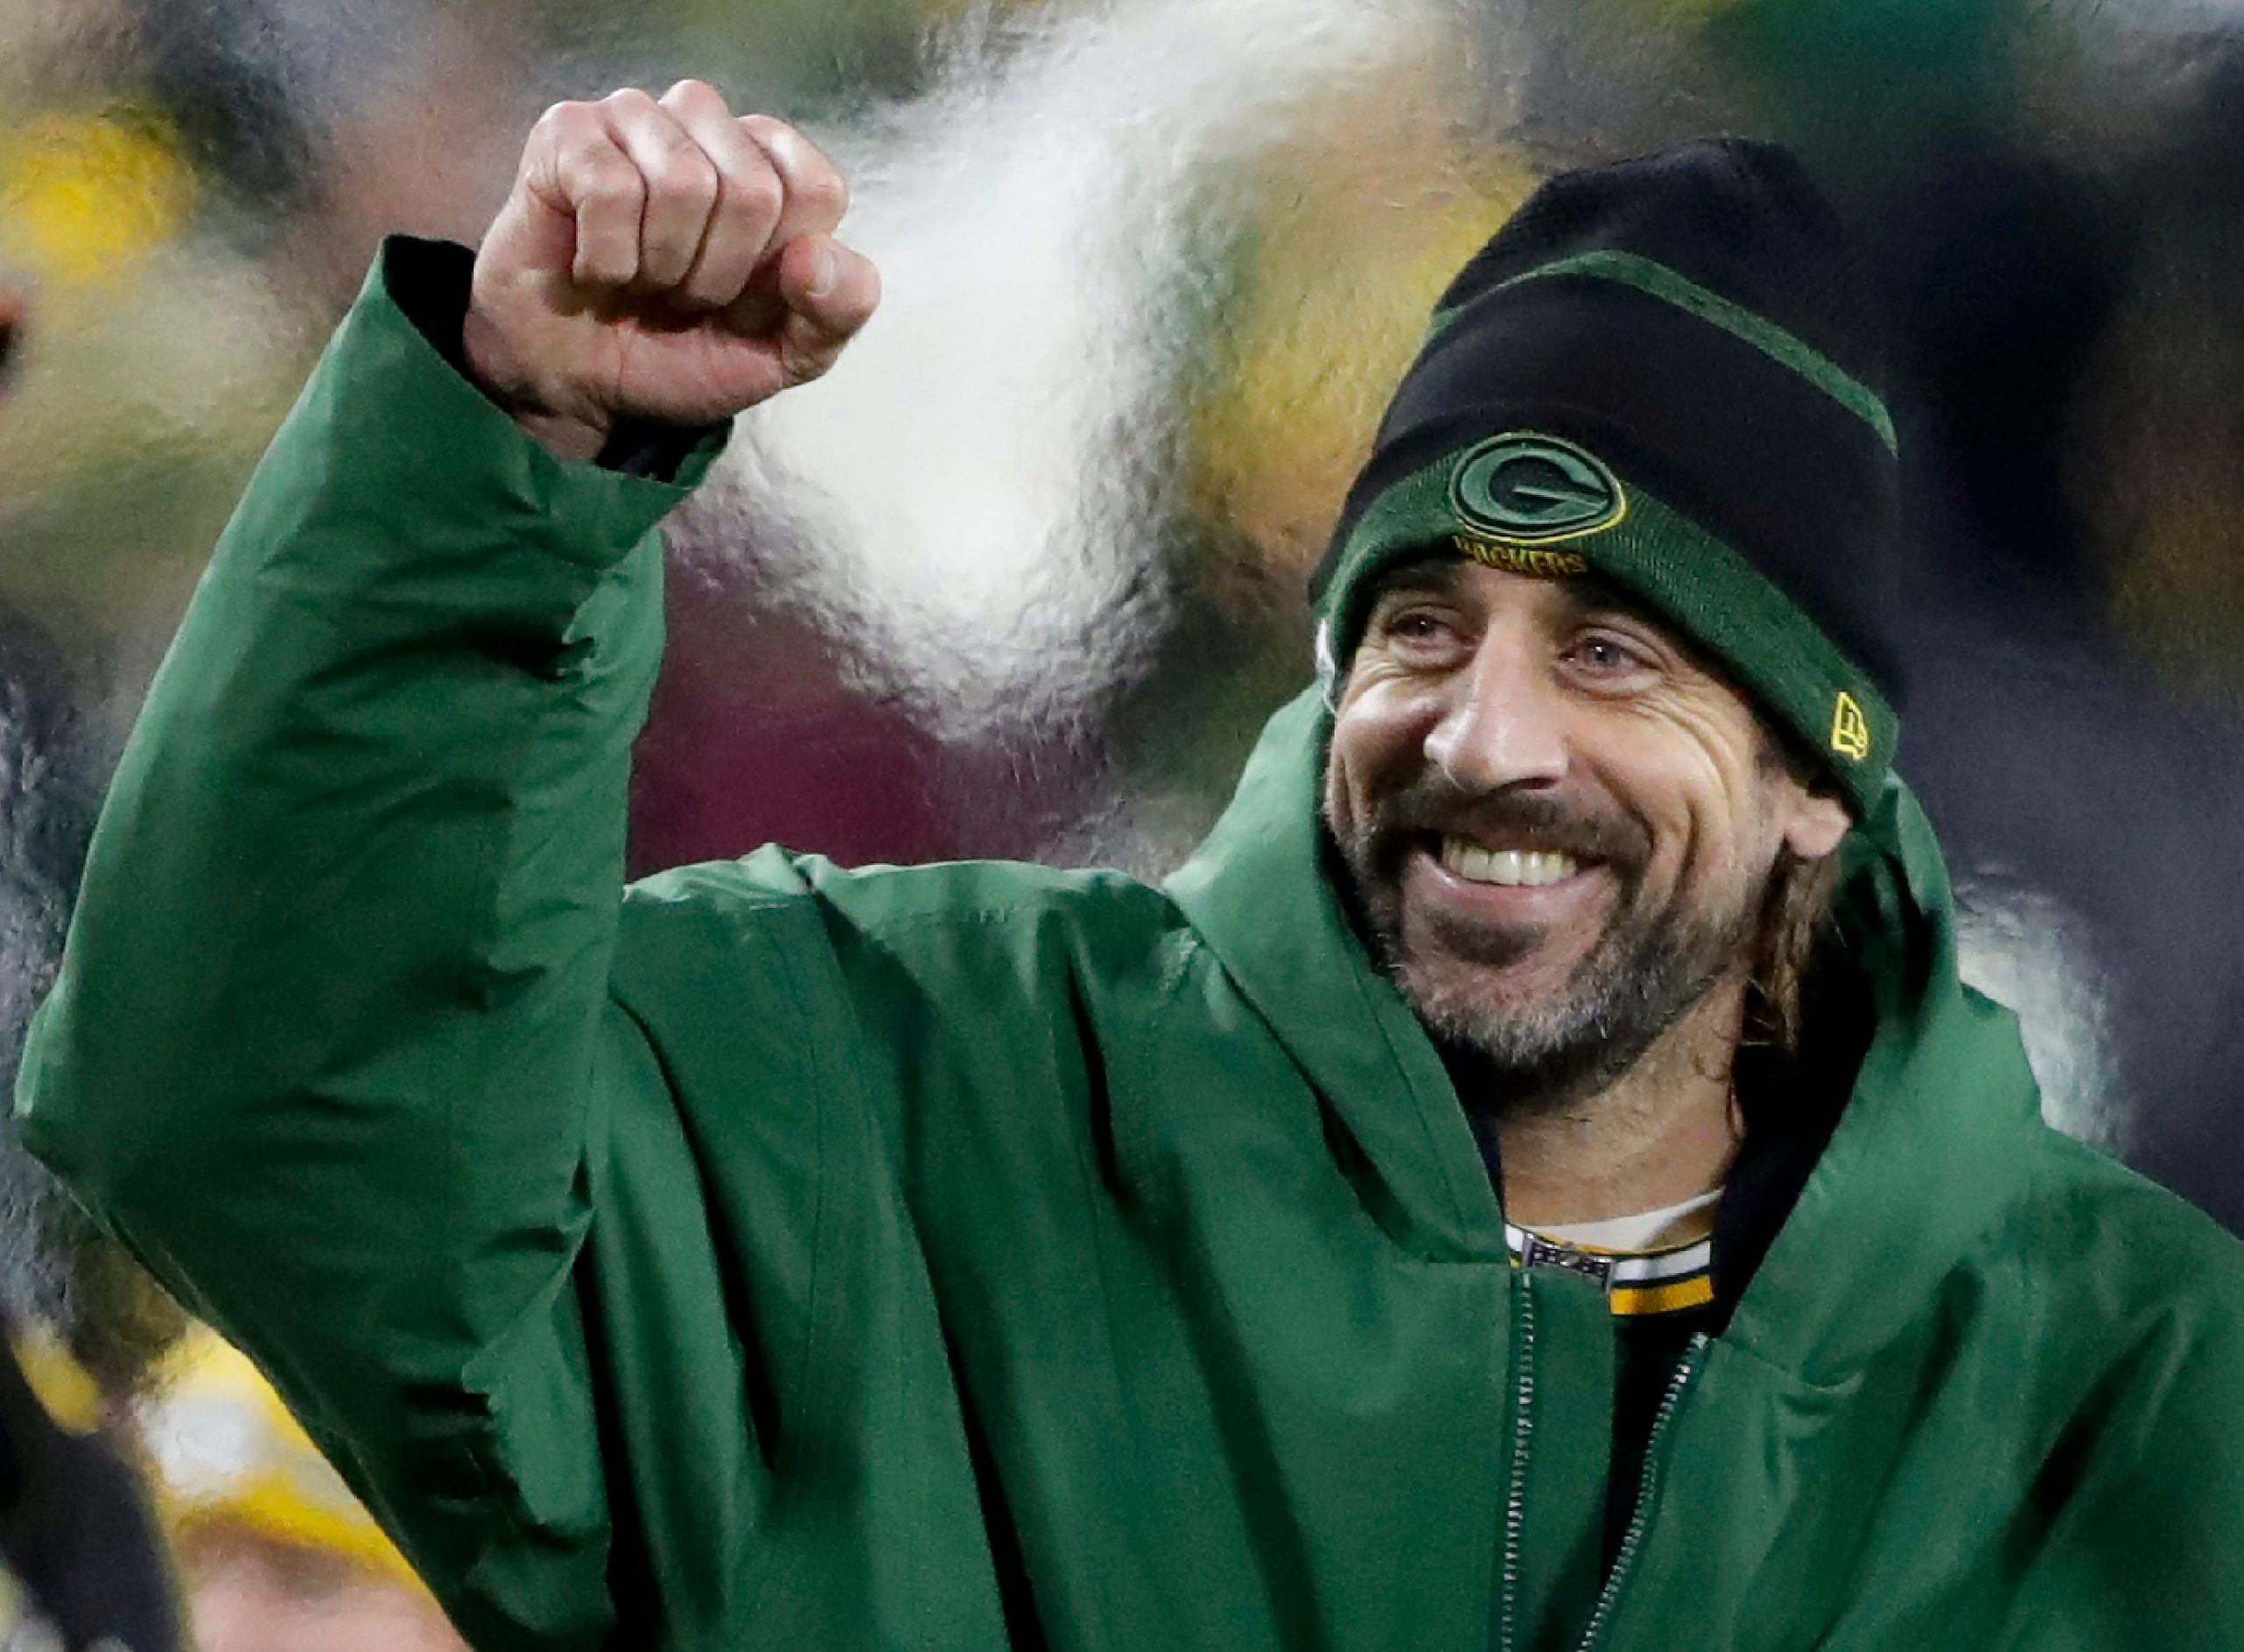 Aaron Rodgers (12) following the Packers victory over the Chicago Bears during their football game on Sunday December 12, 2021, at Lambeau Field in Green Bay, Wis